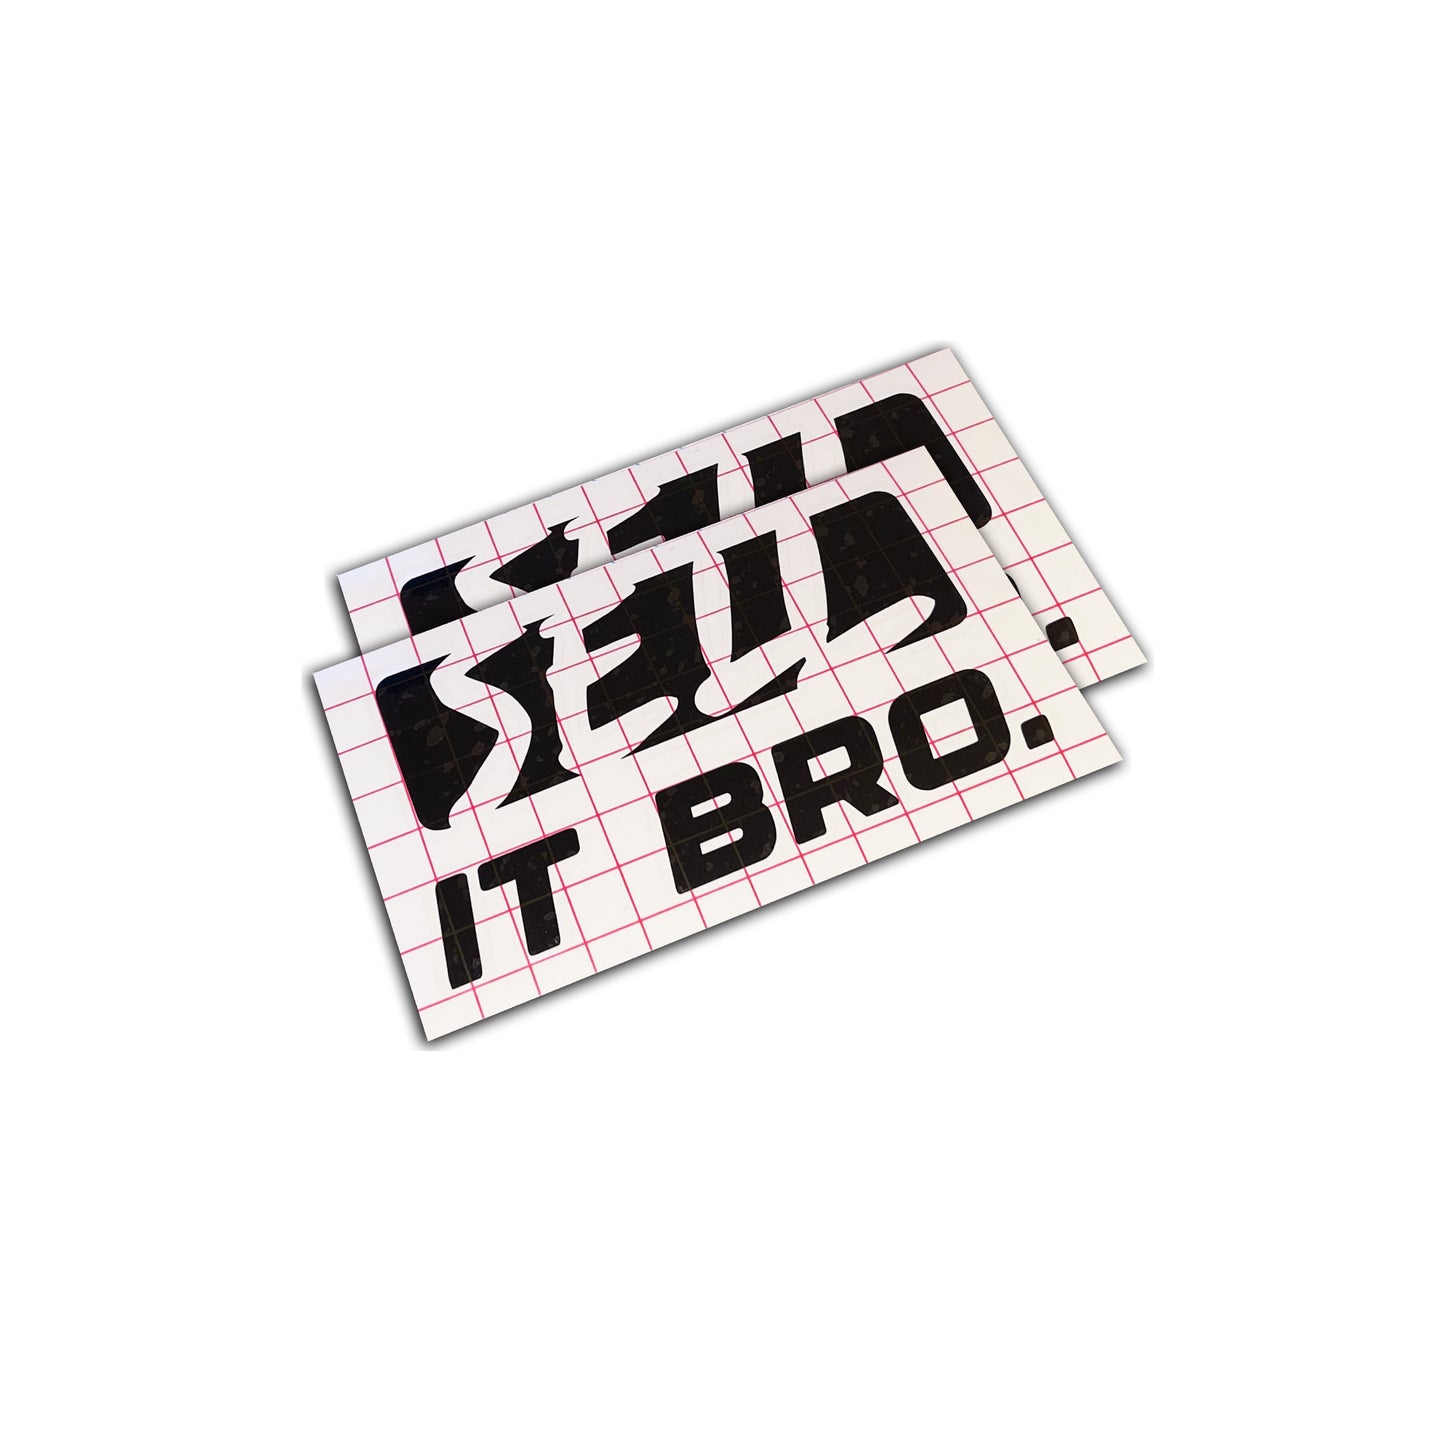 SELL IT BRO - Decal